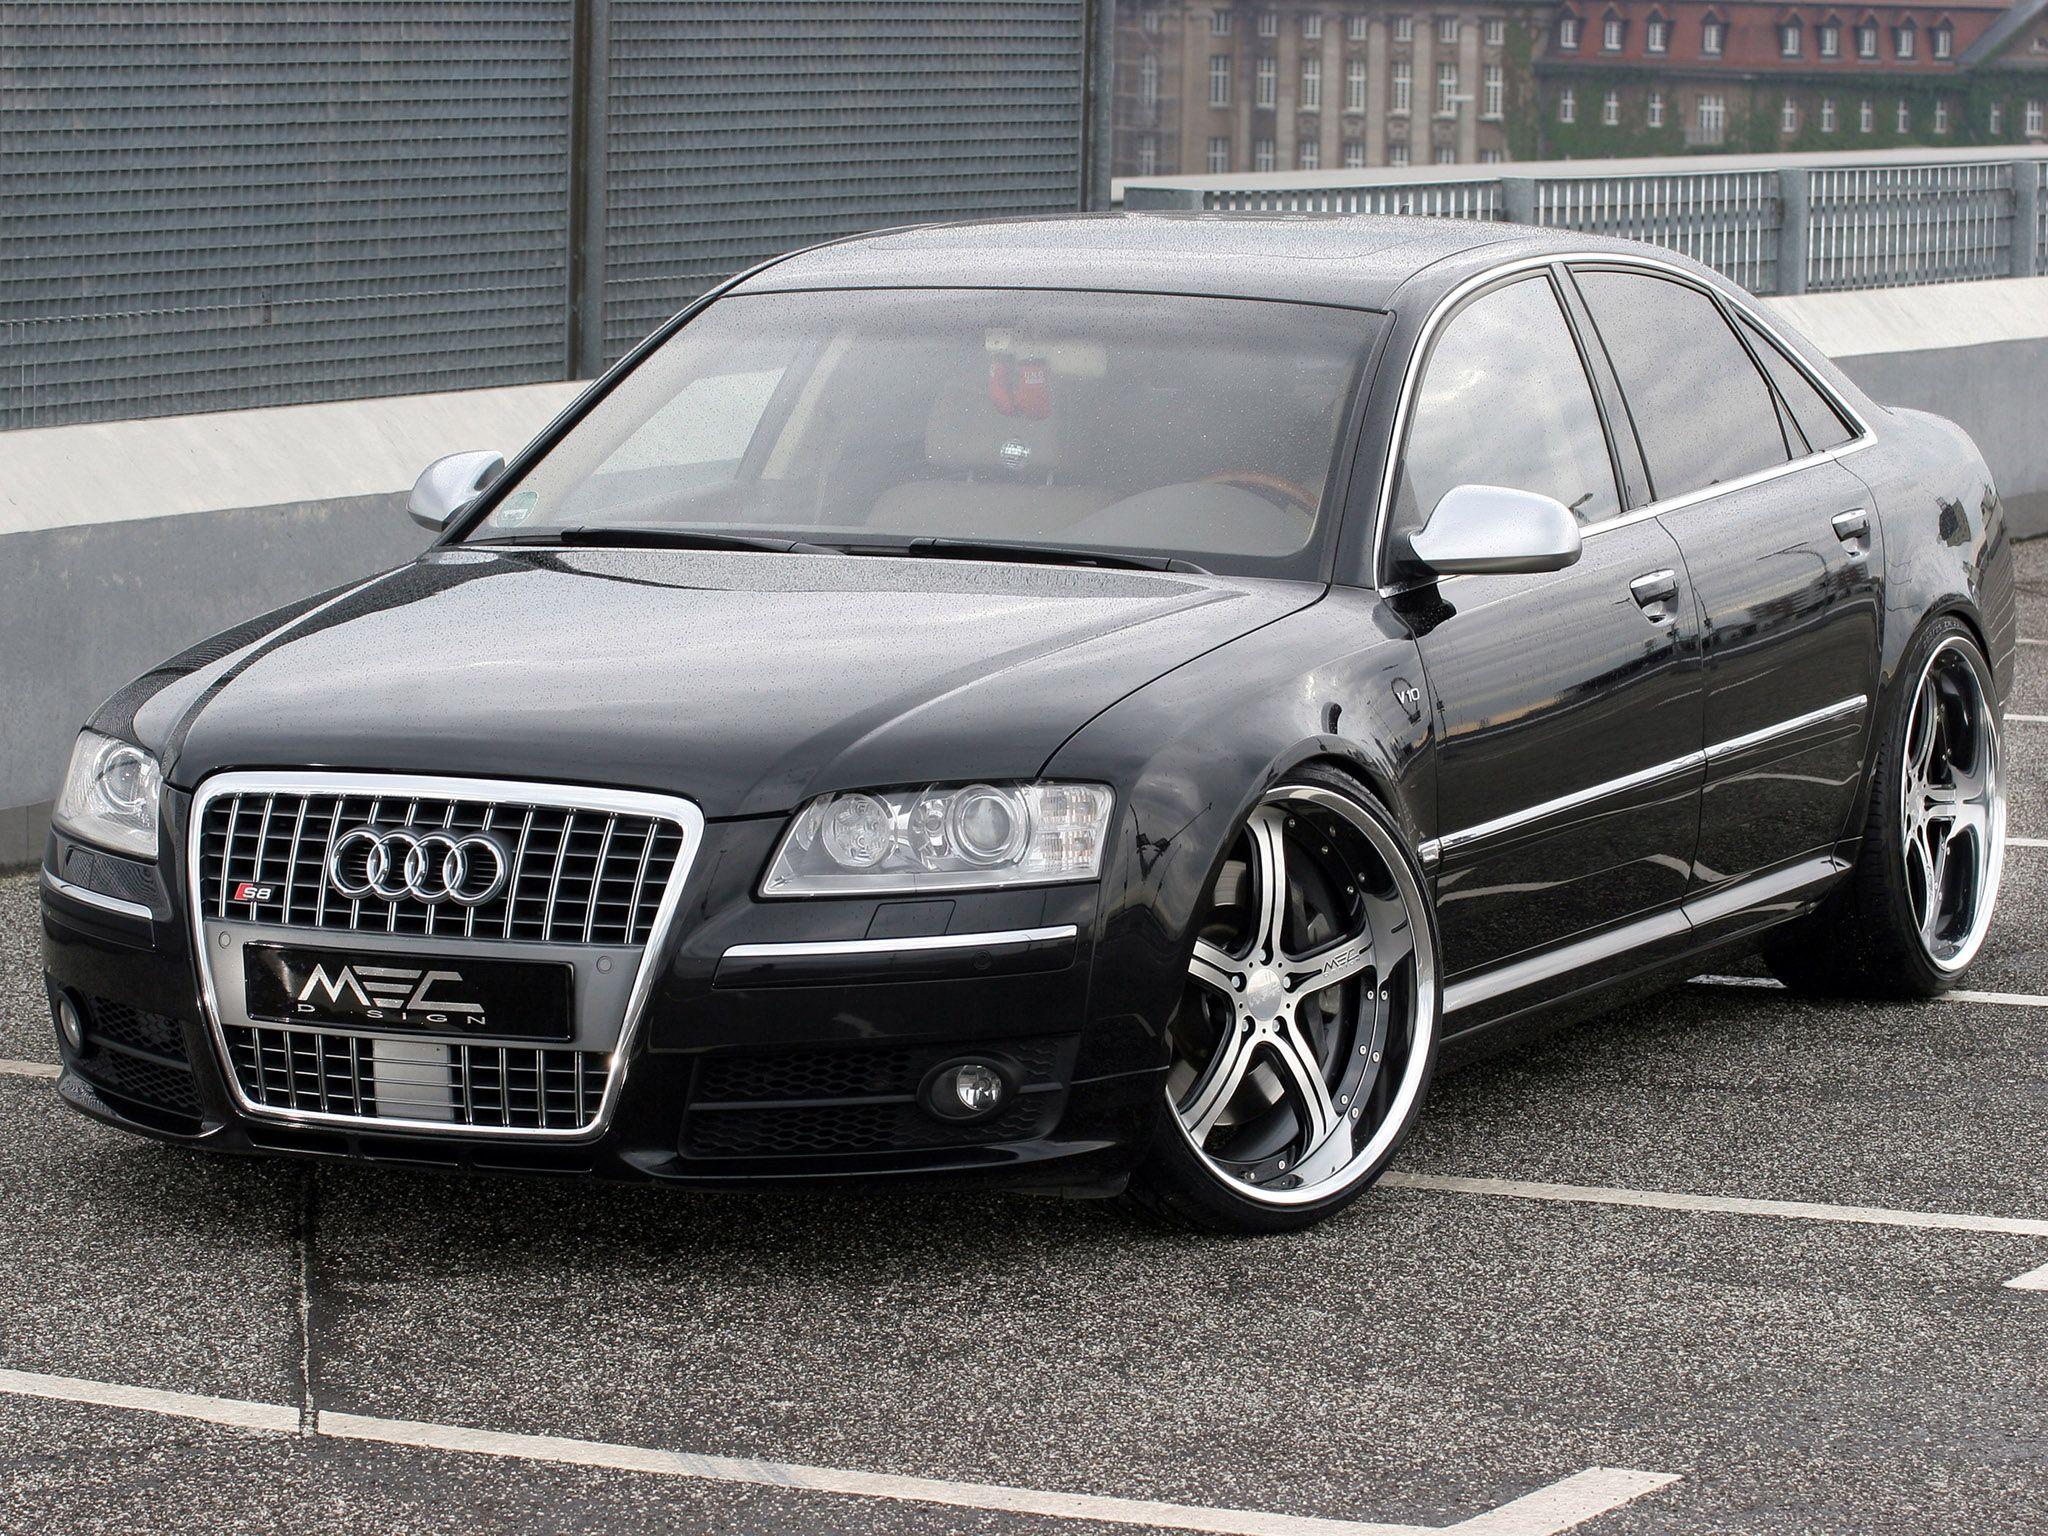 Audi S8 Photo and Wallpaper